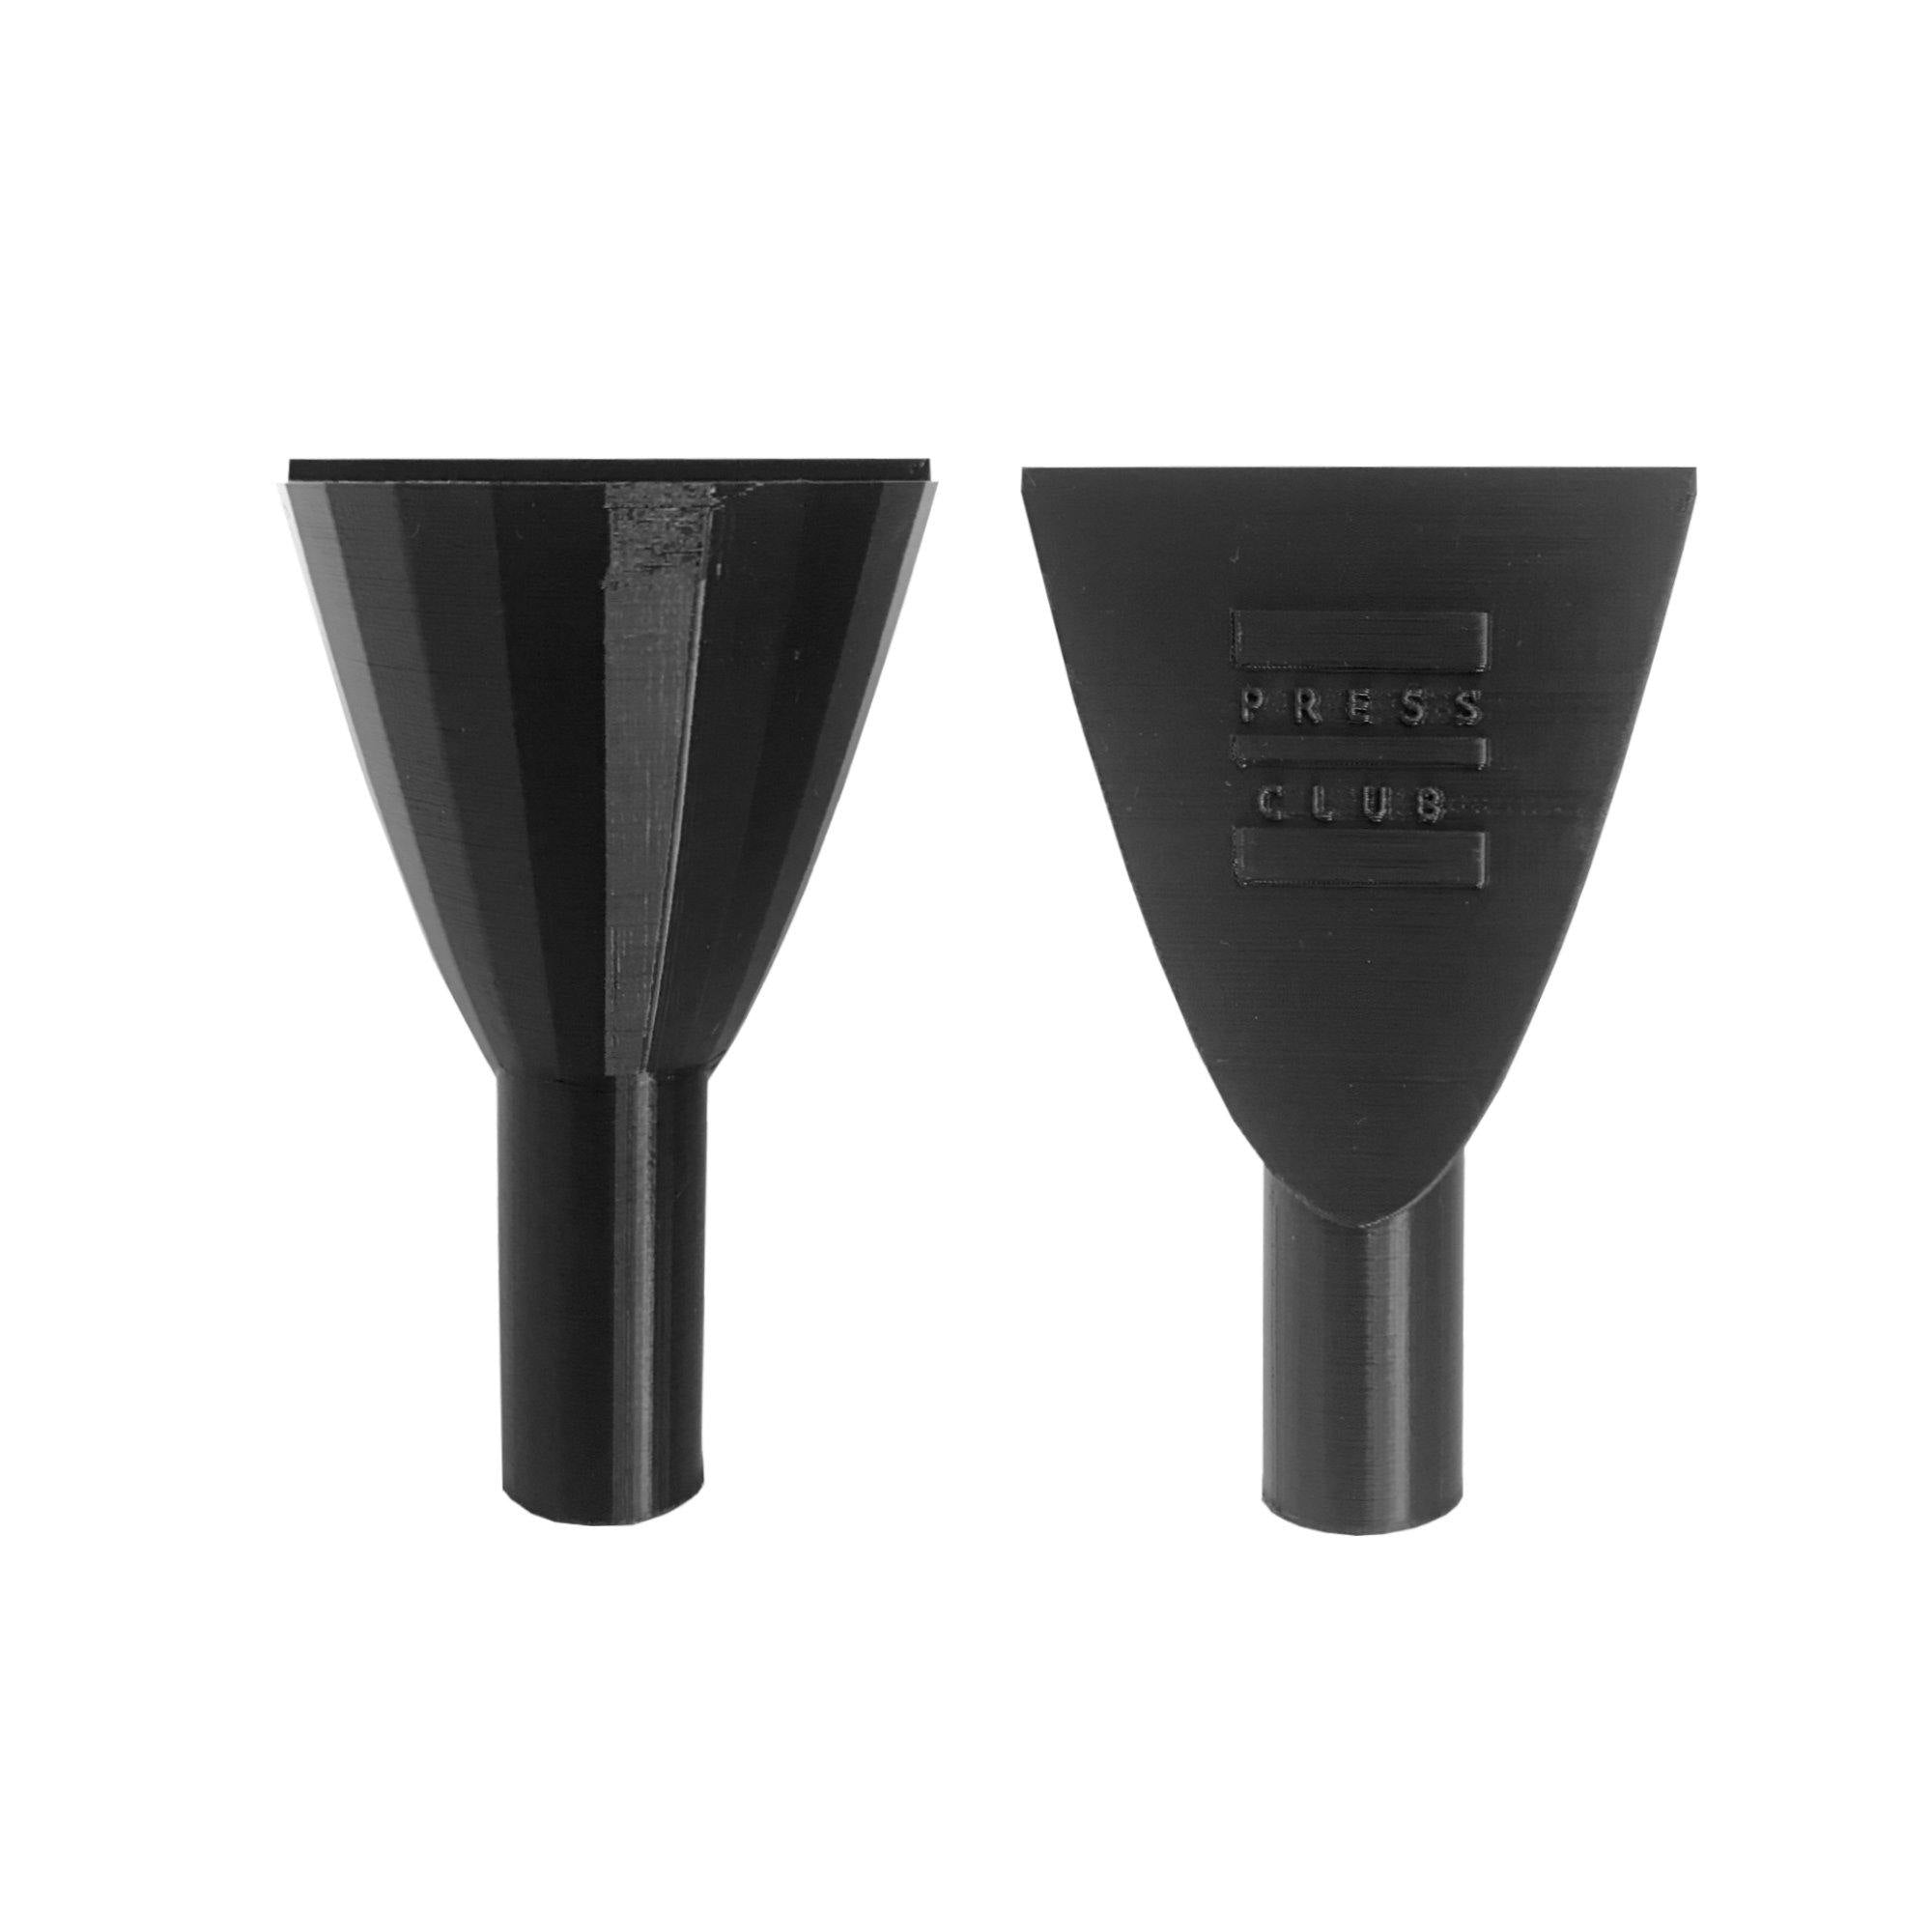 Small Plastic Funnels in 2 Sizes - 6 Pack